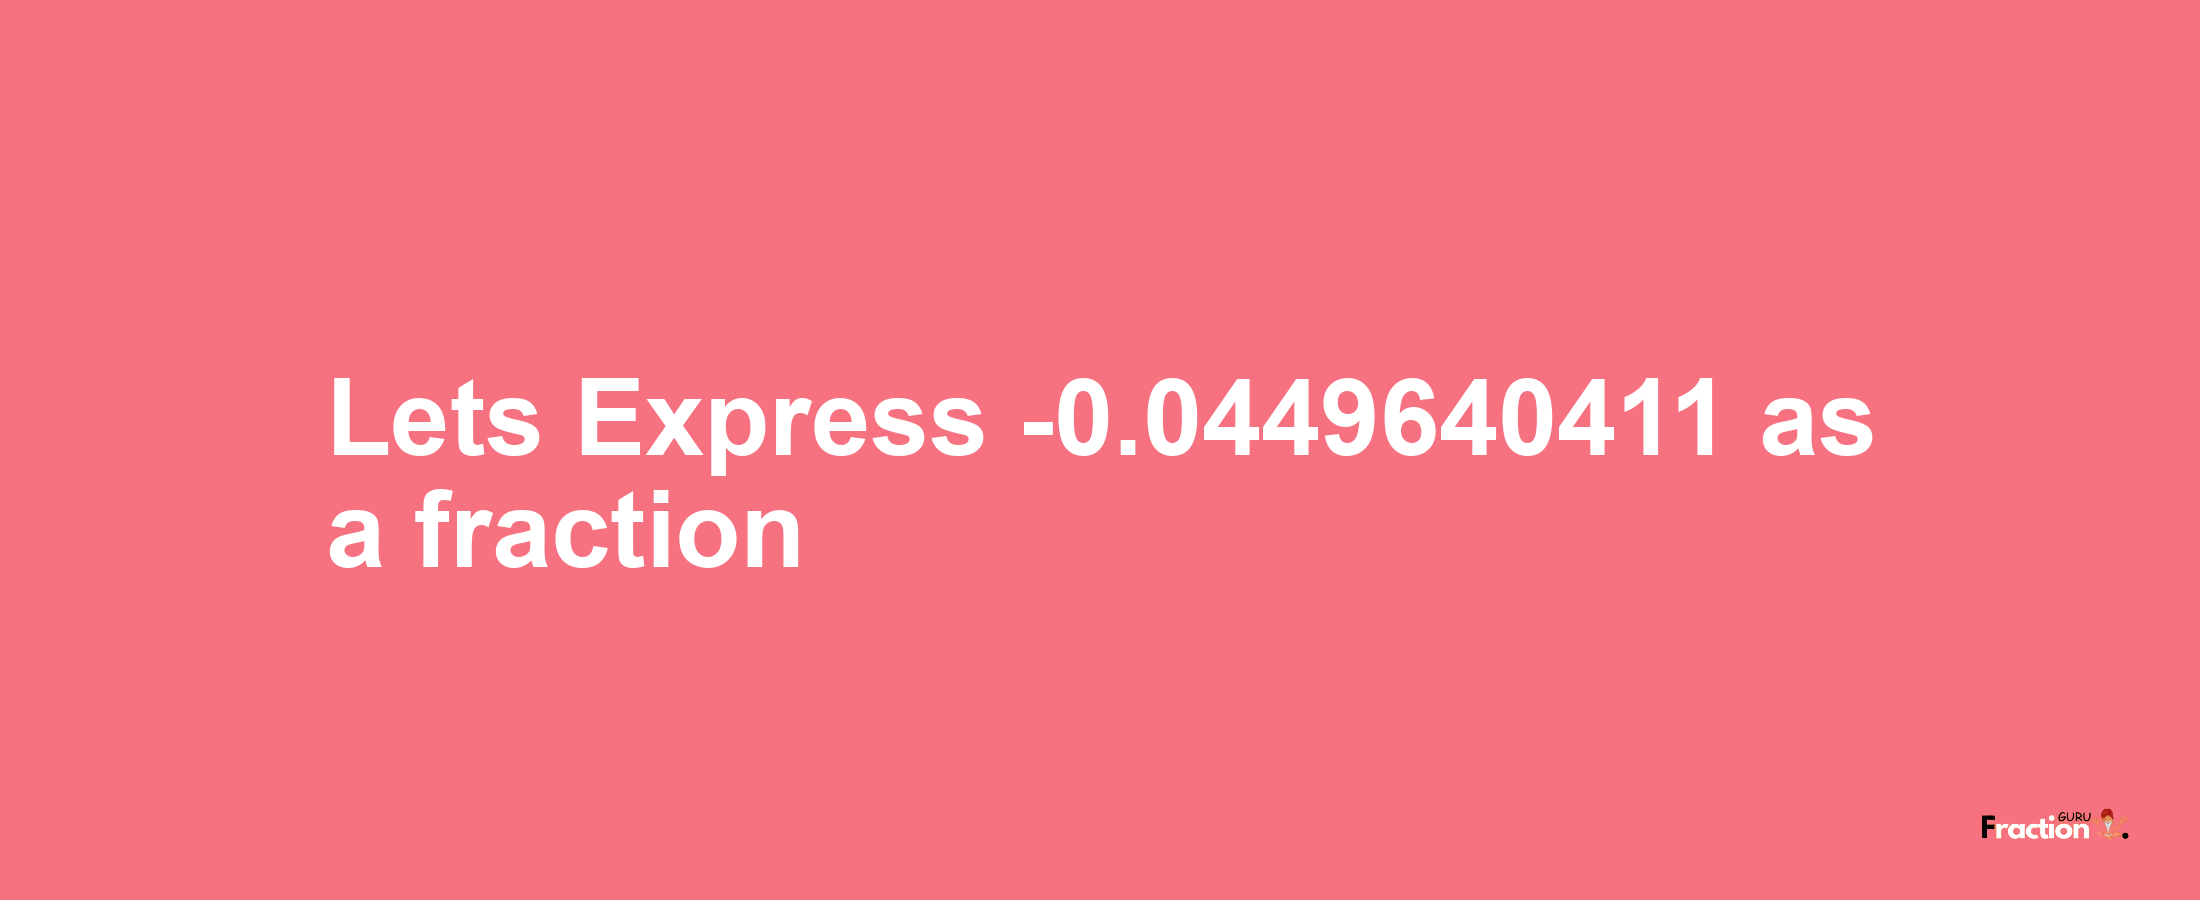 Lets Express -0.0449640411 as afraction